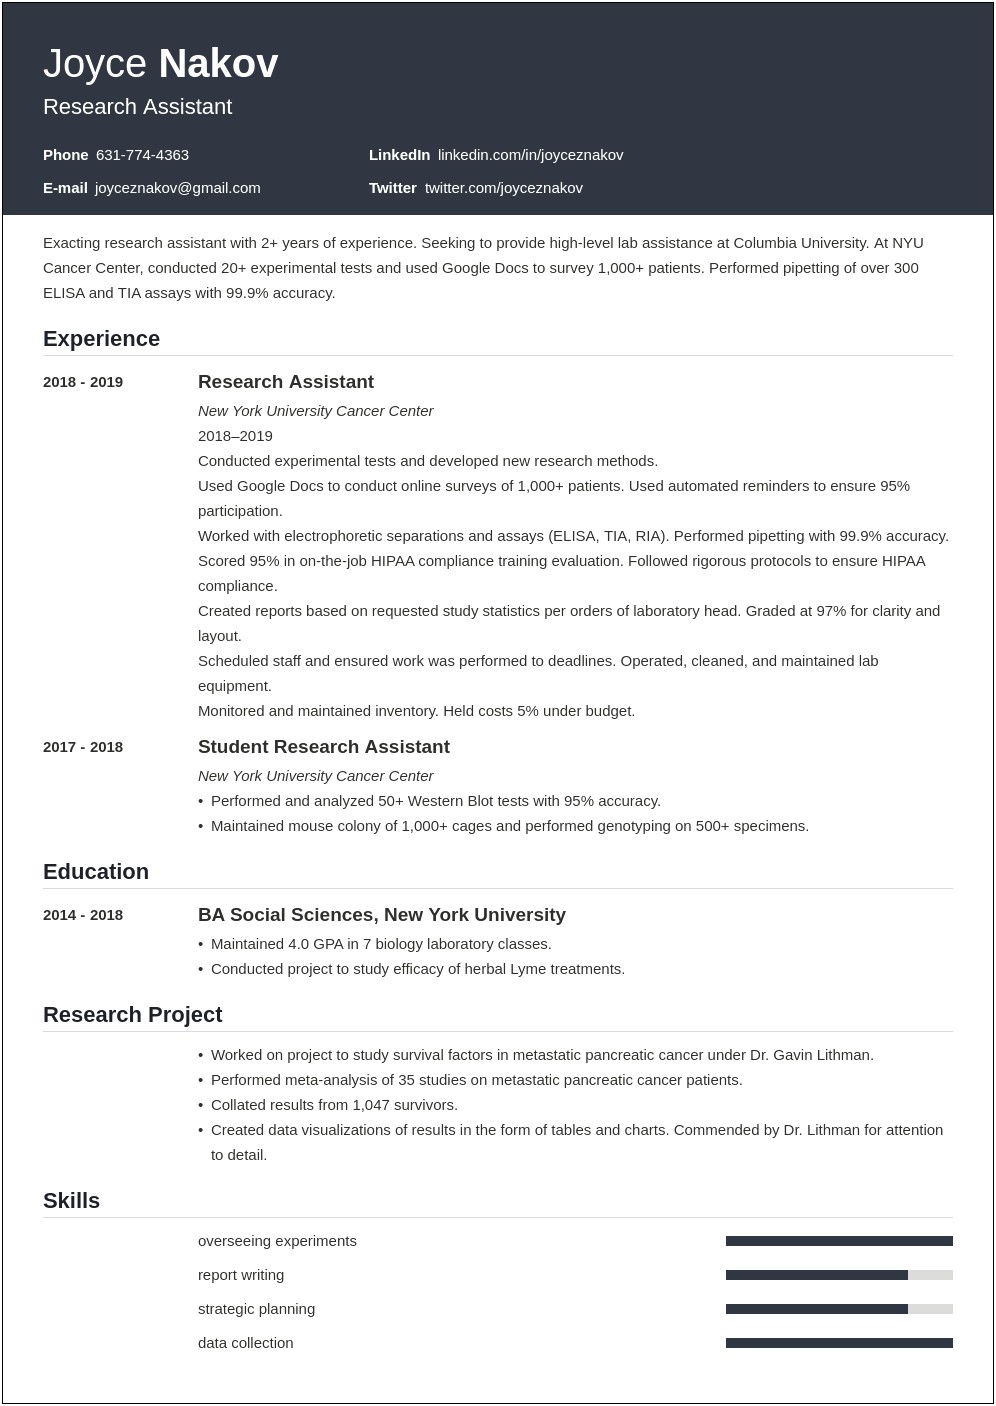 Sample Resume With Research Experience